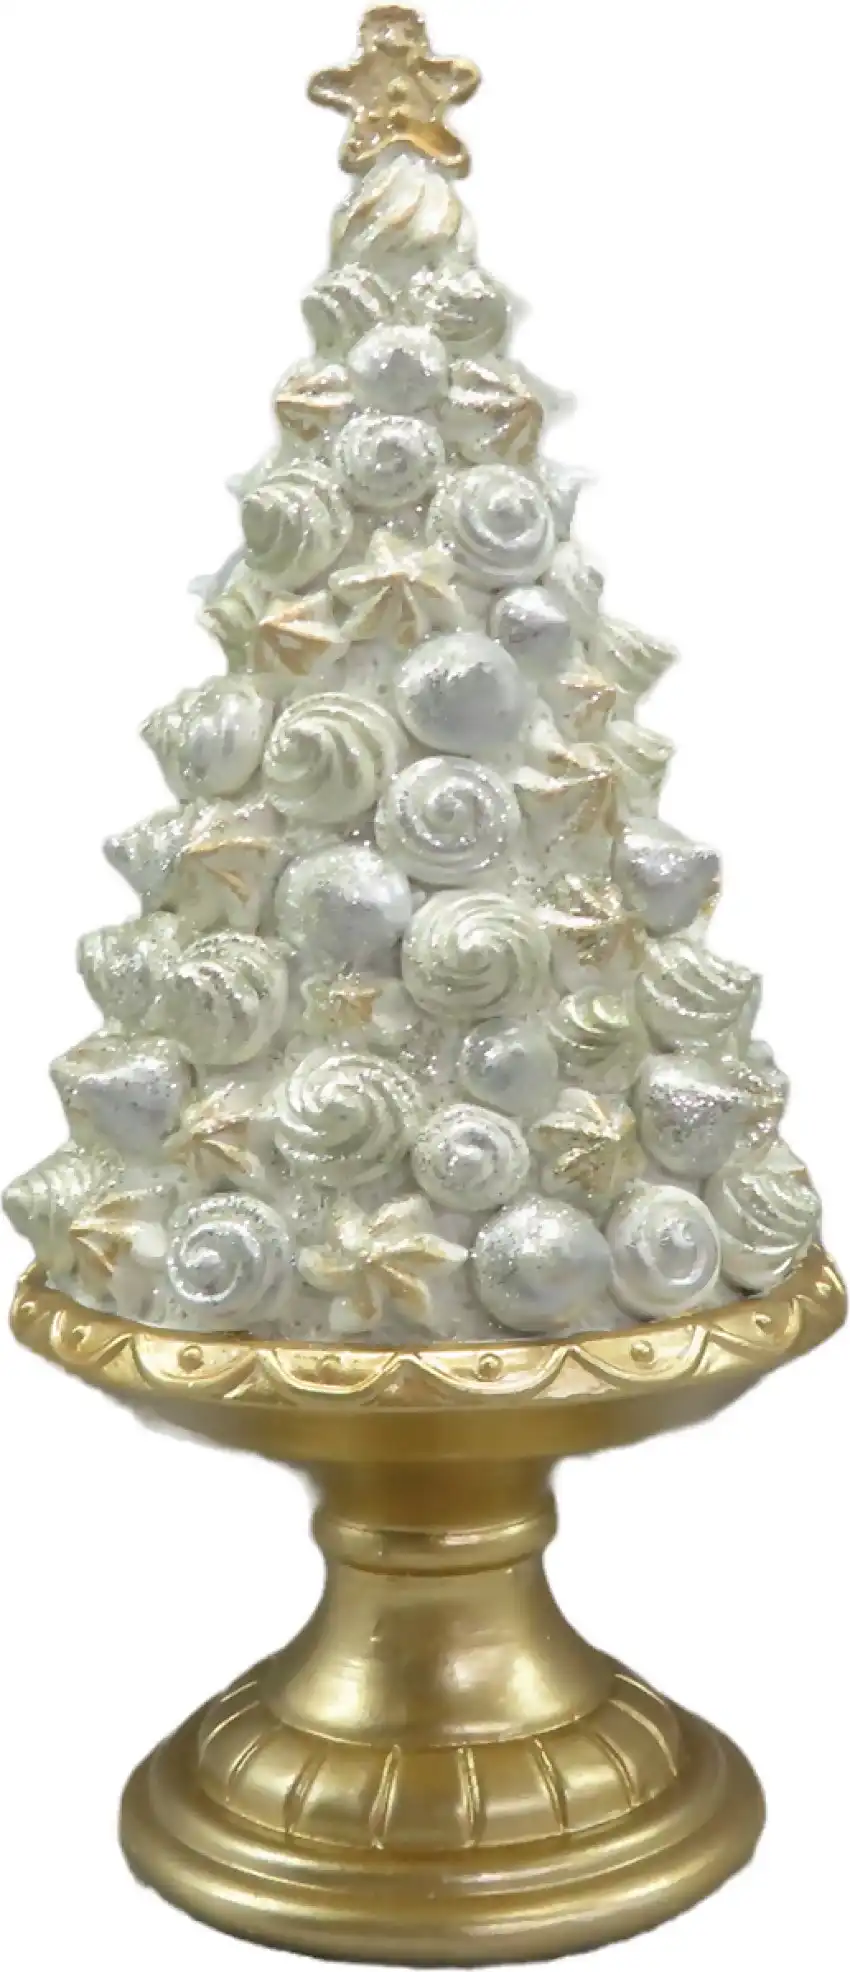 Cotton Candy - Xmas Gold Candy Christmas Tree Ornament